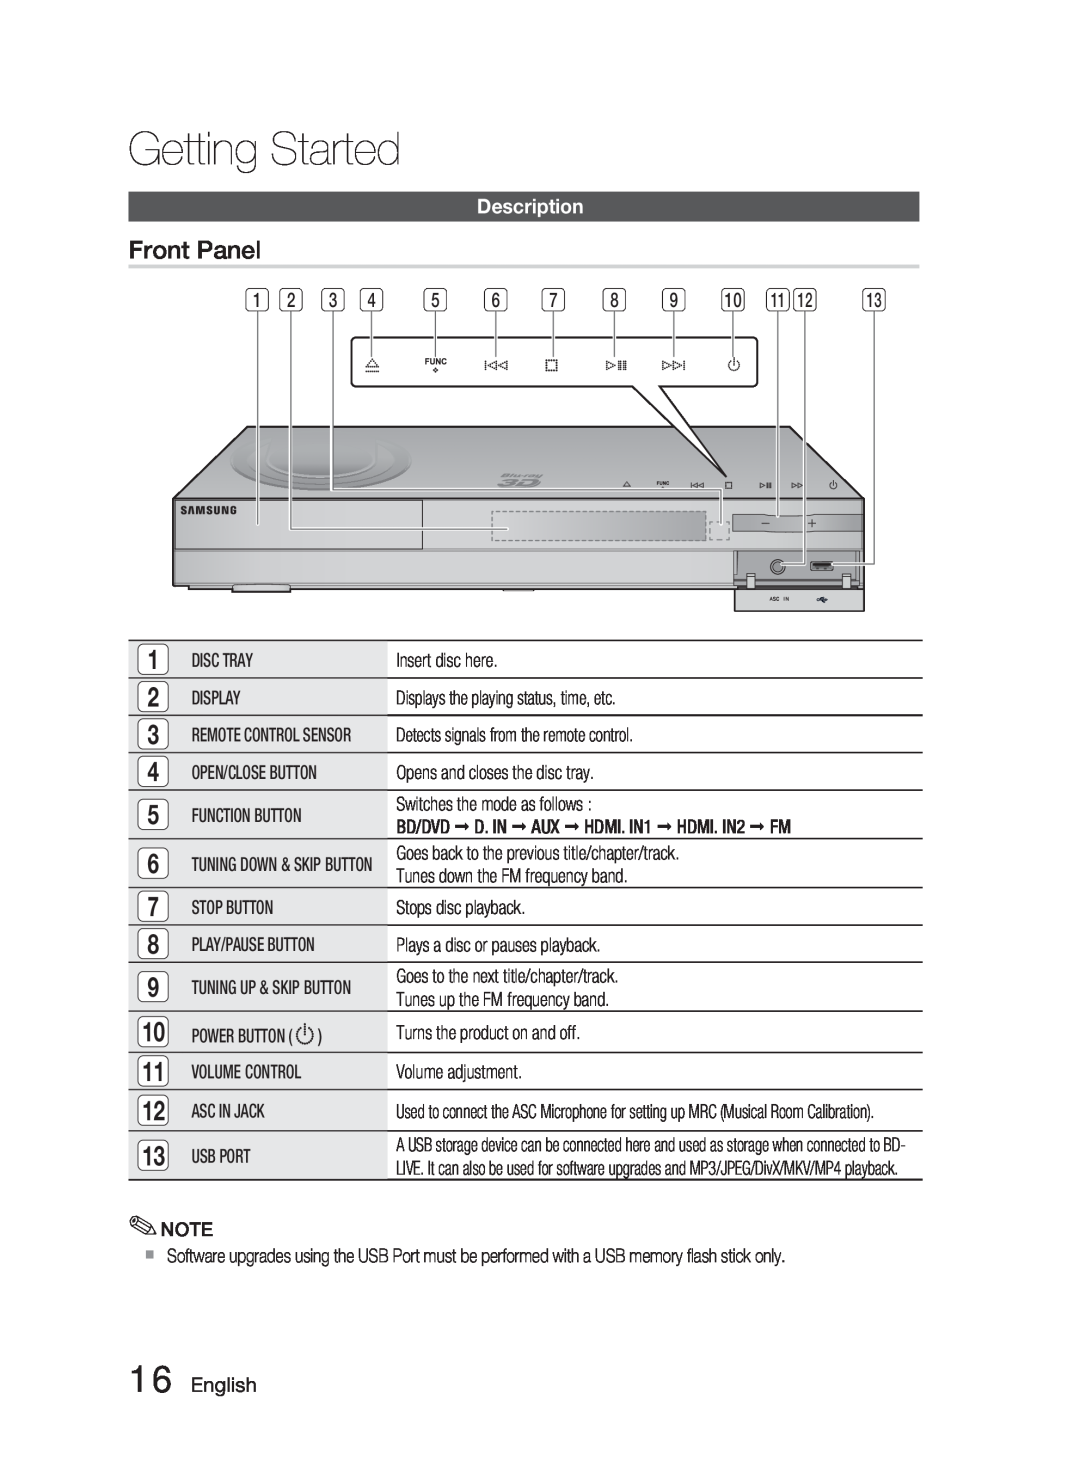 Samsung HT-C6900W user manual Front Panel, Description, English, Getting Started 